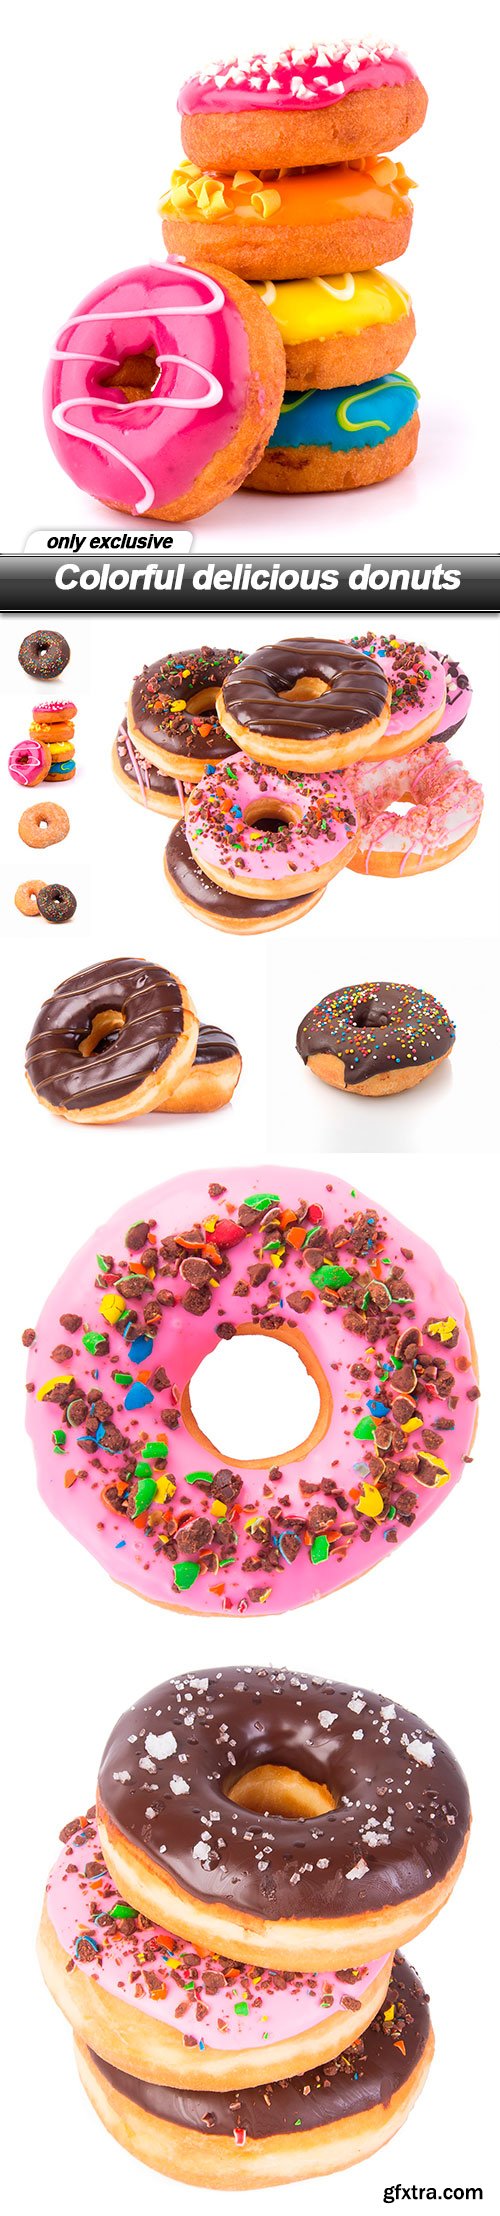 Colorful delicious donuts - 9 UHQ JPEG